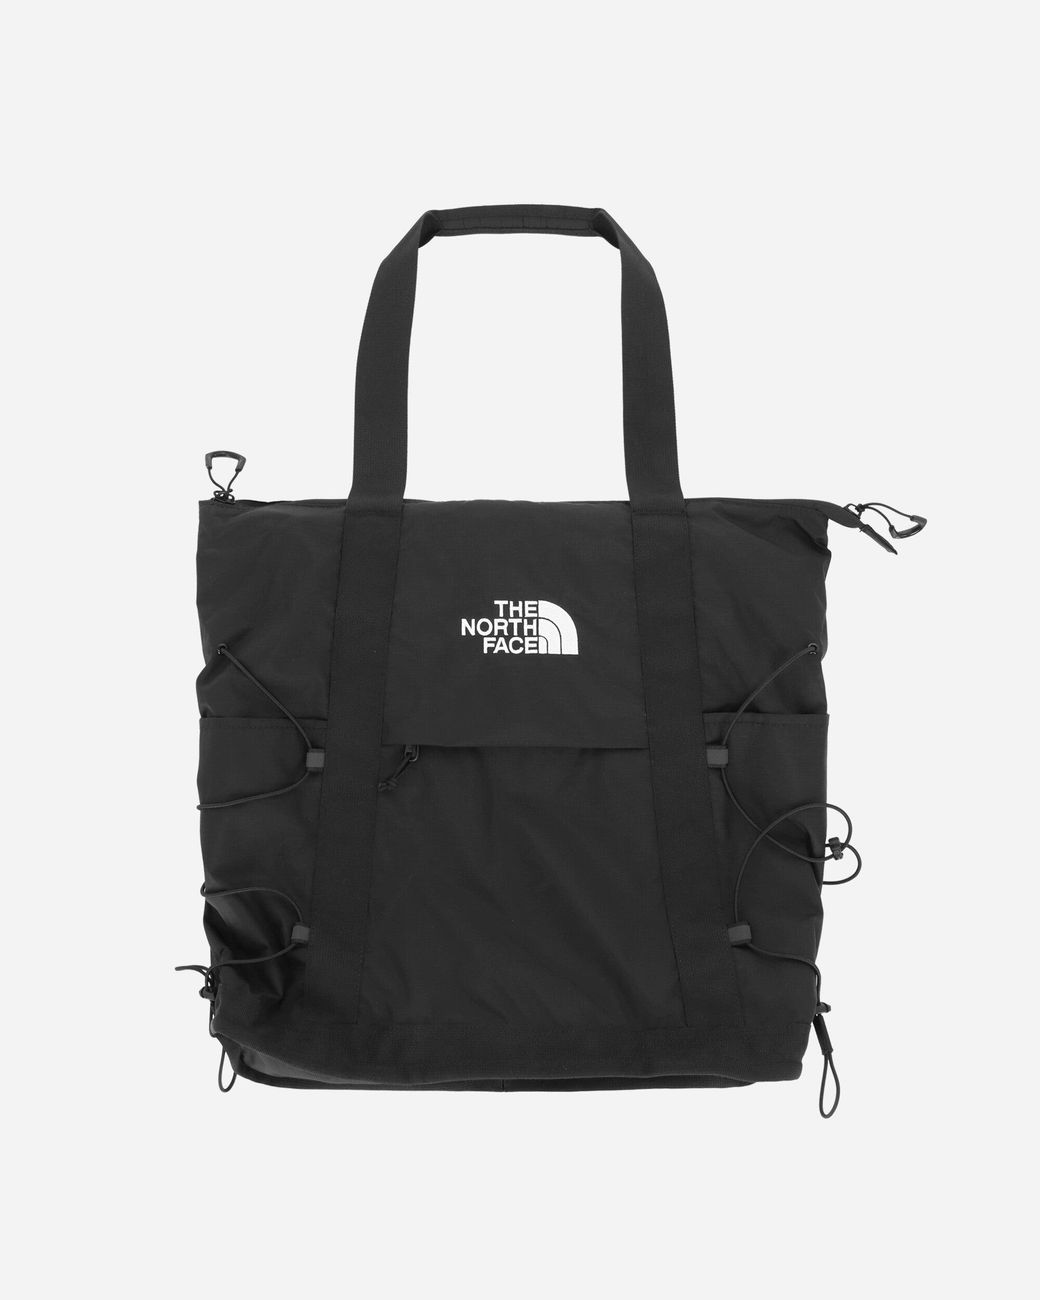 The North Face Borealis Tote Bag Black for Men | Lyst